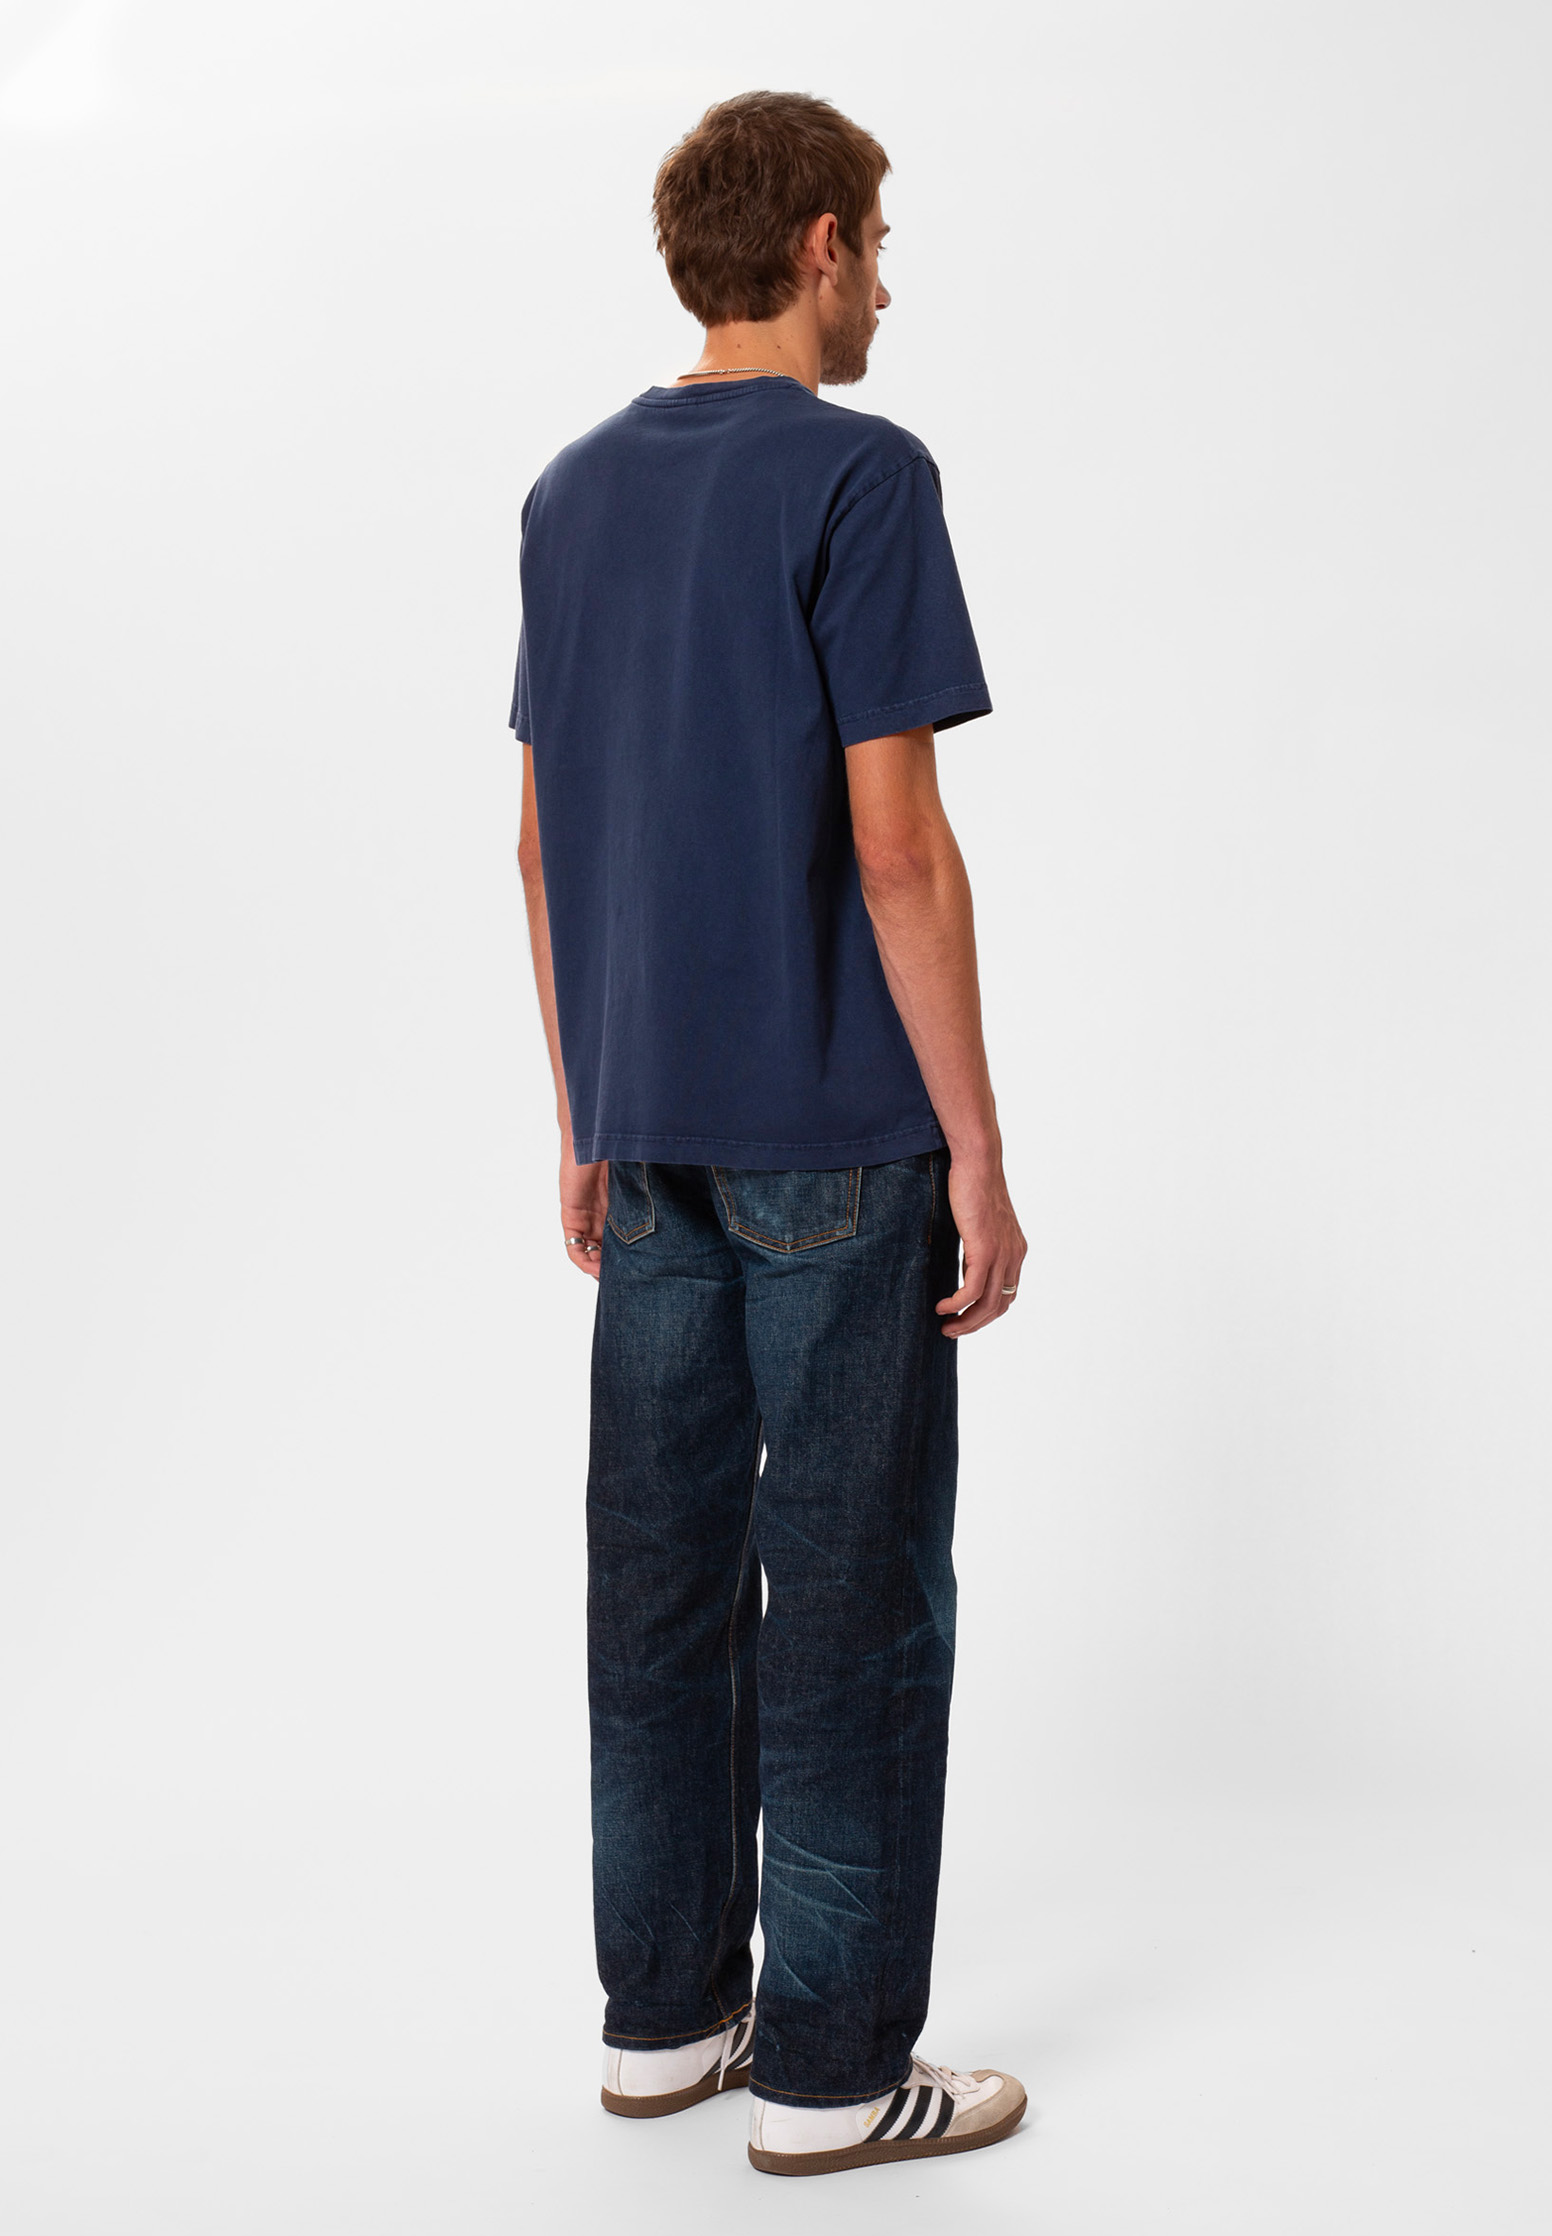 NUDIE JEANS T-Shirt Uno Everyday Tee blue L